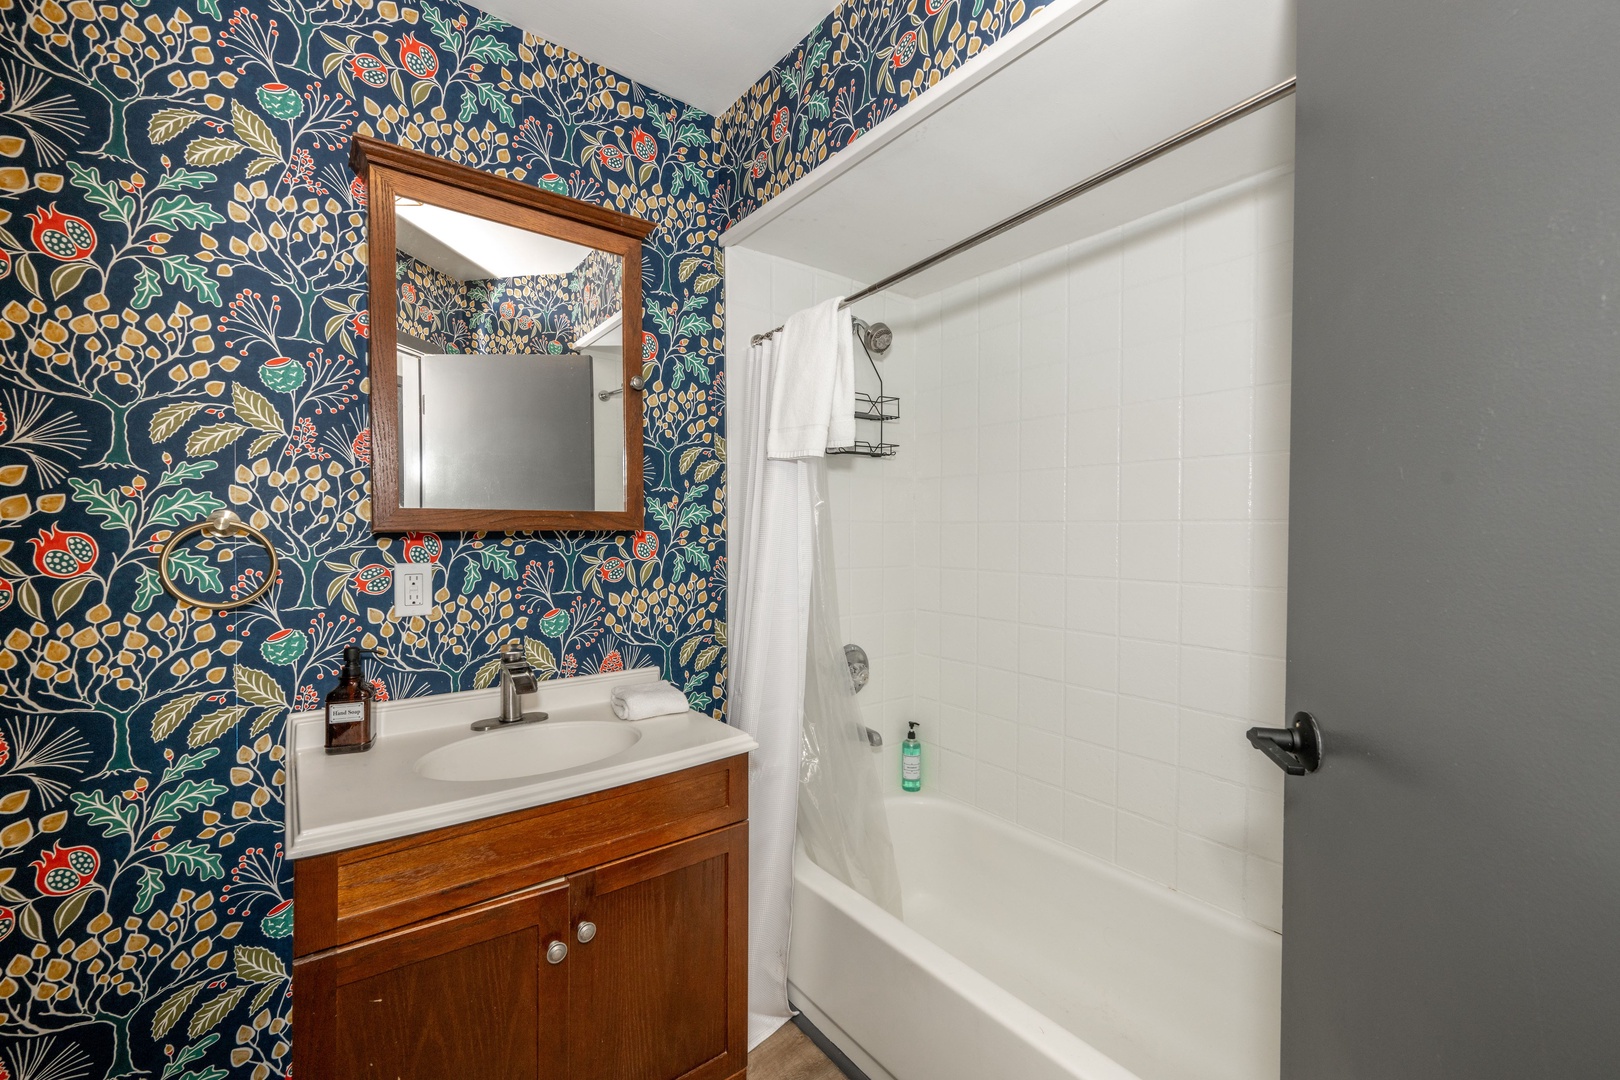 The final full bath on the lower level offers a single vanity & shower/tub combo